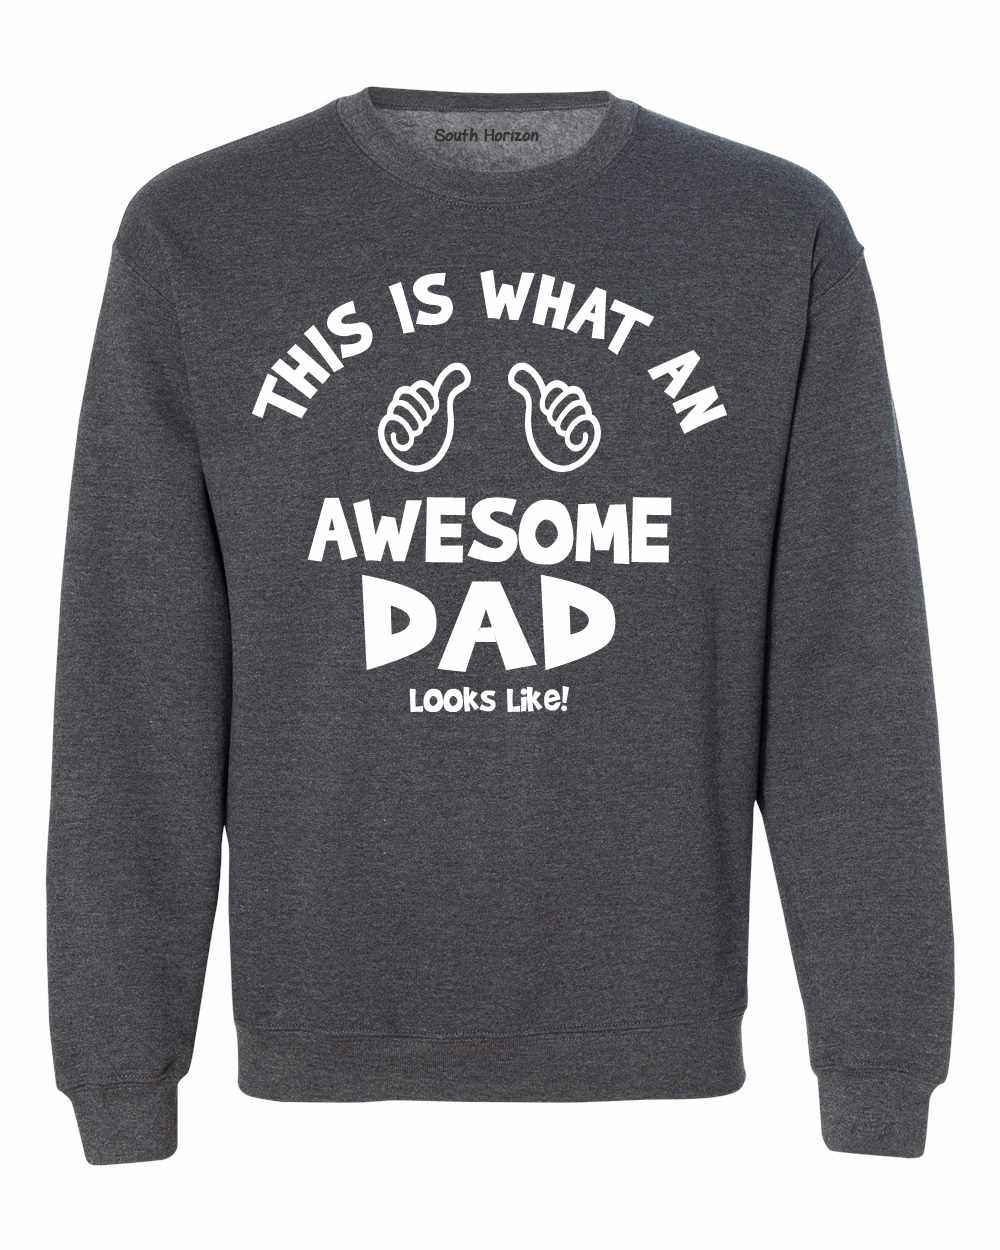 This Is What An Awesome DAD Look Like on SweatShirt